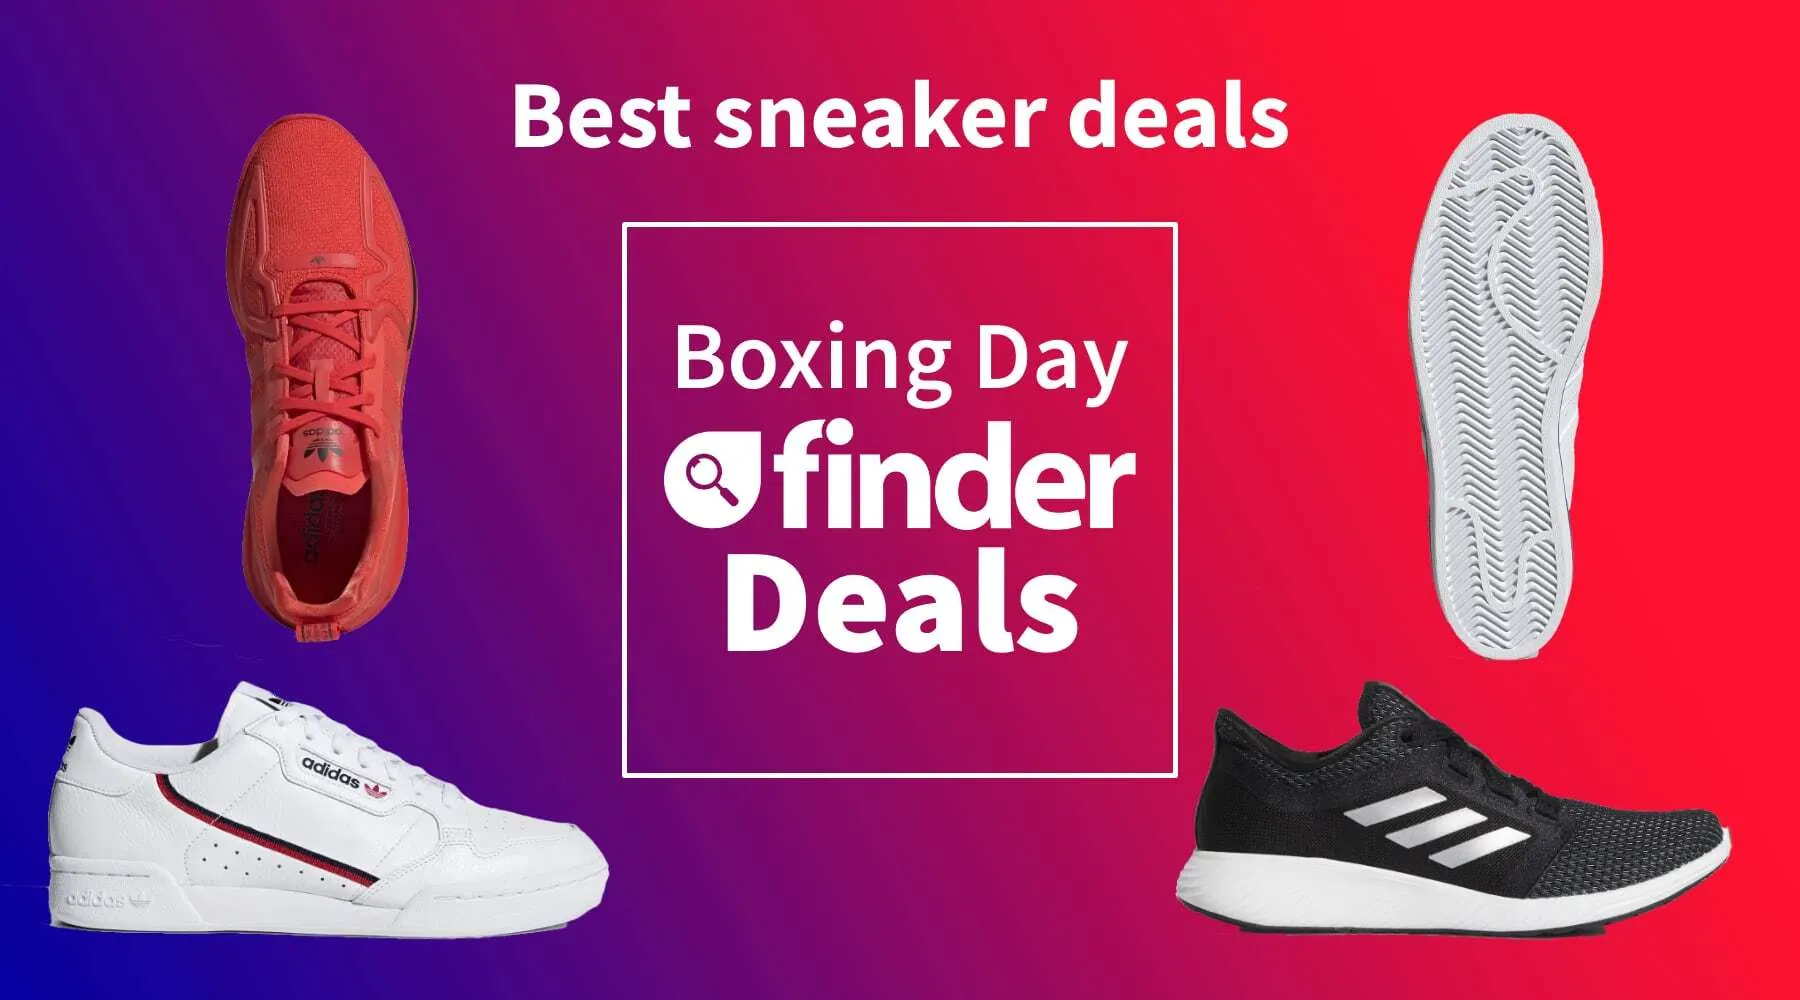 adidas sneaker day sale